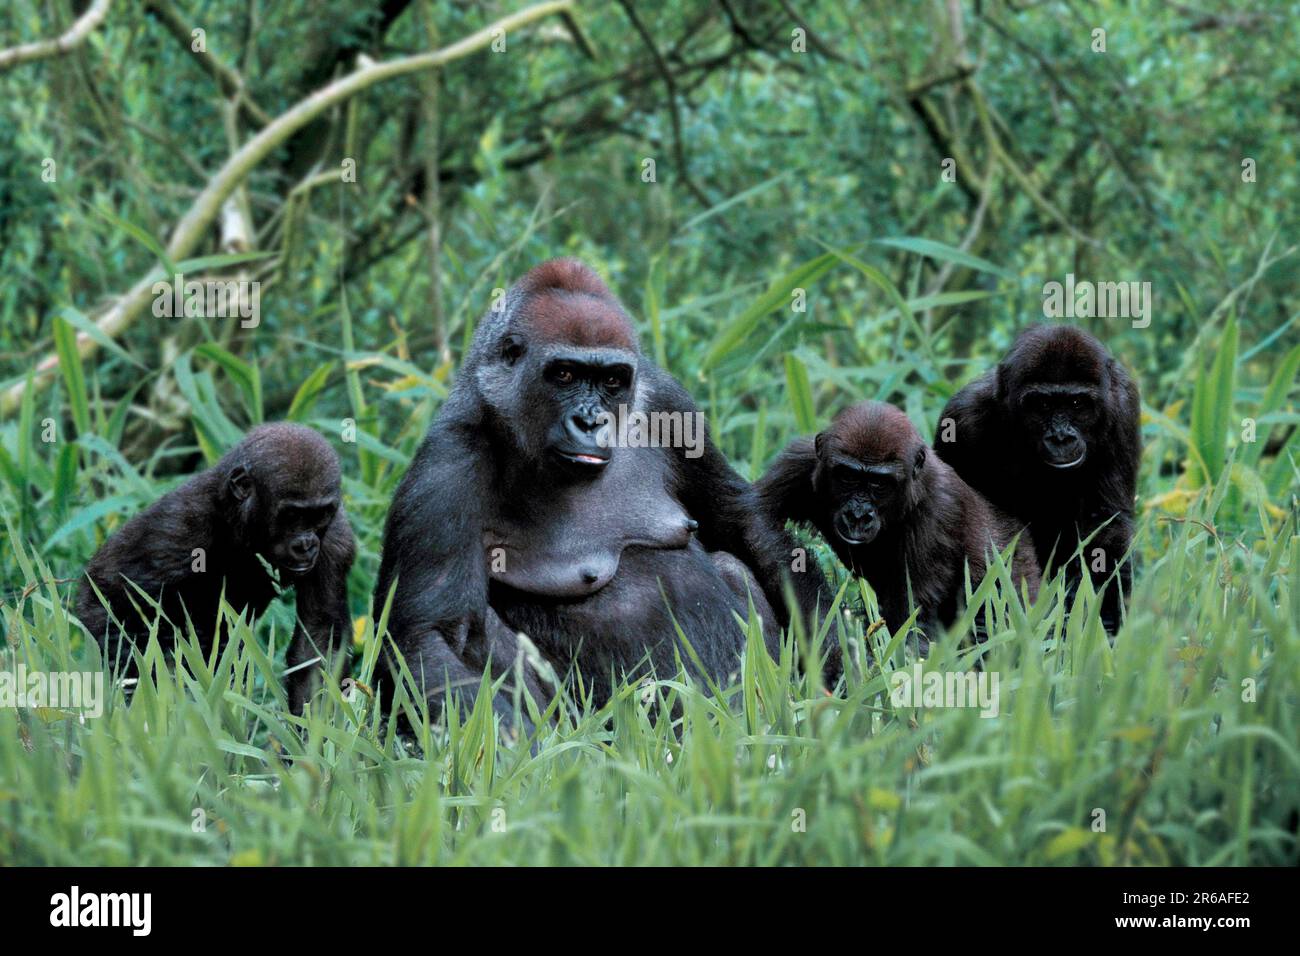 Western gorilla, female with young, western lowland gorillas (Gorilla gorilla gorilla), female and young Stock Photo